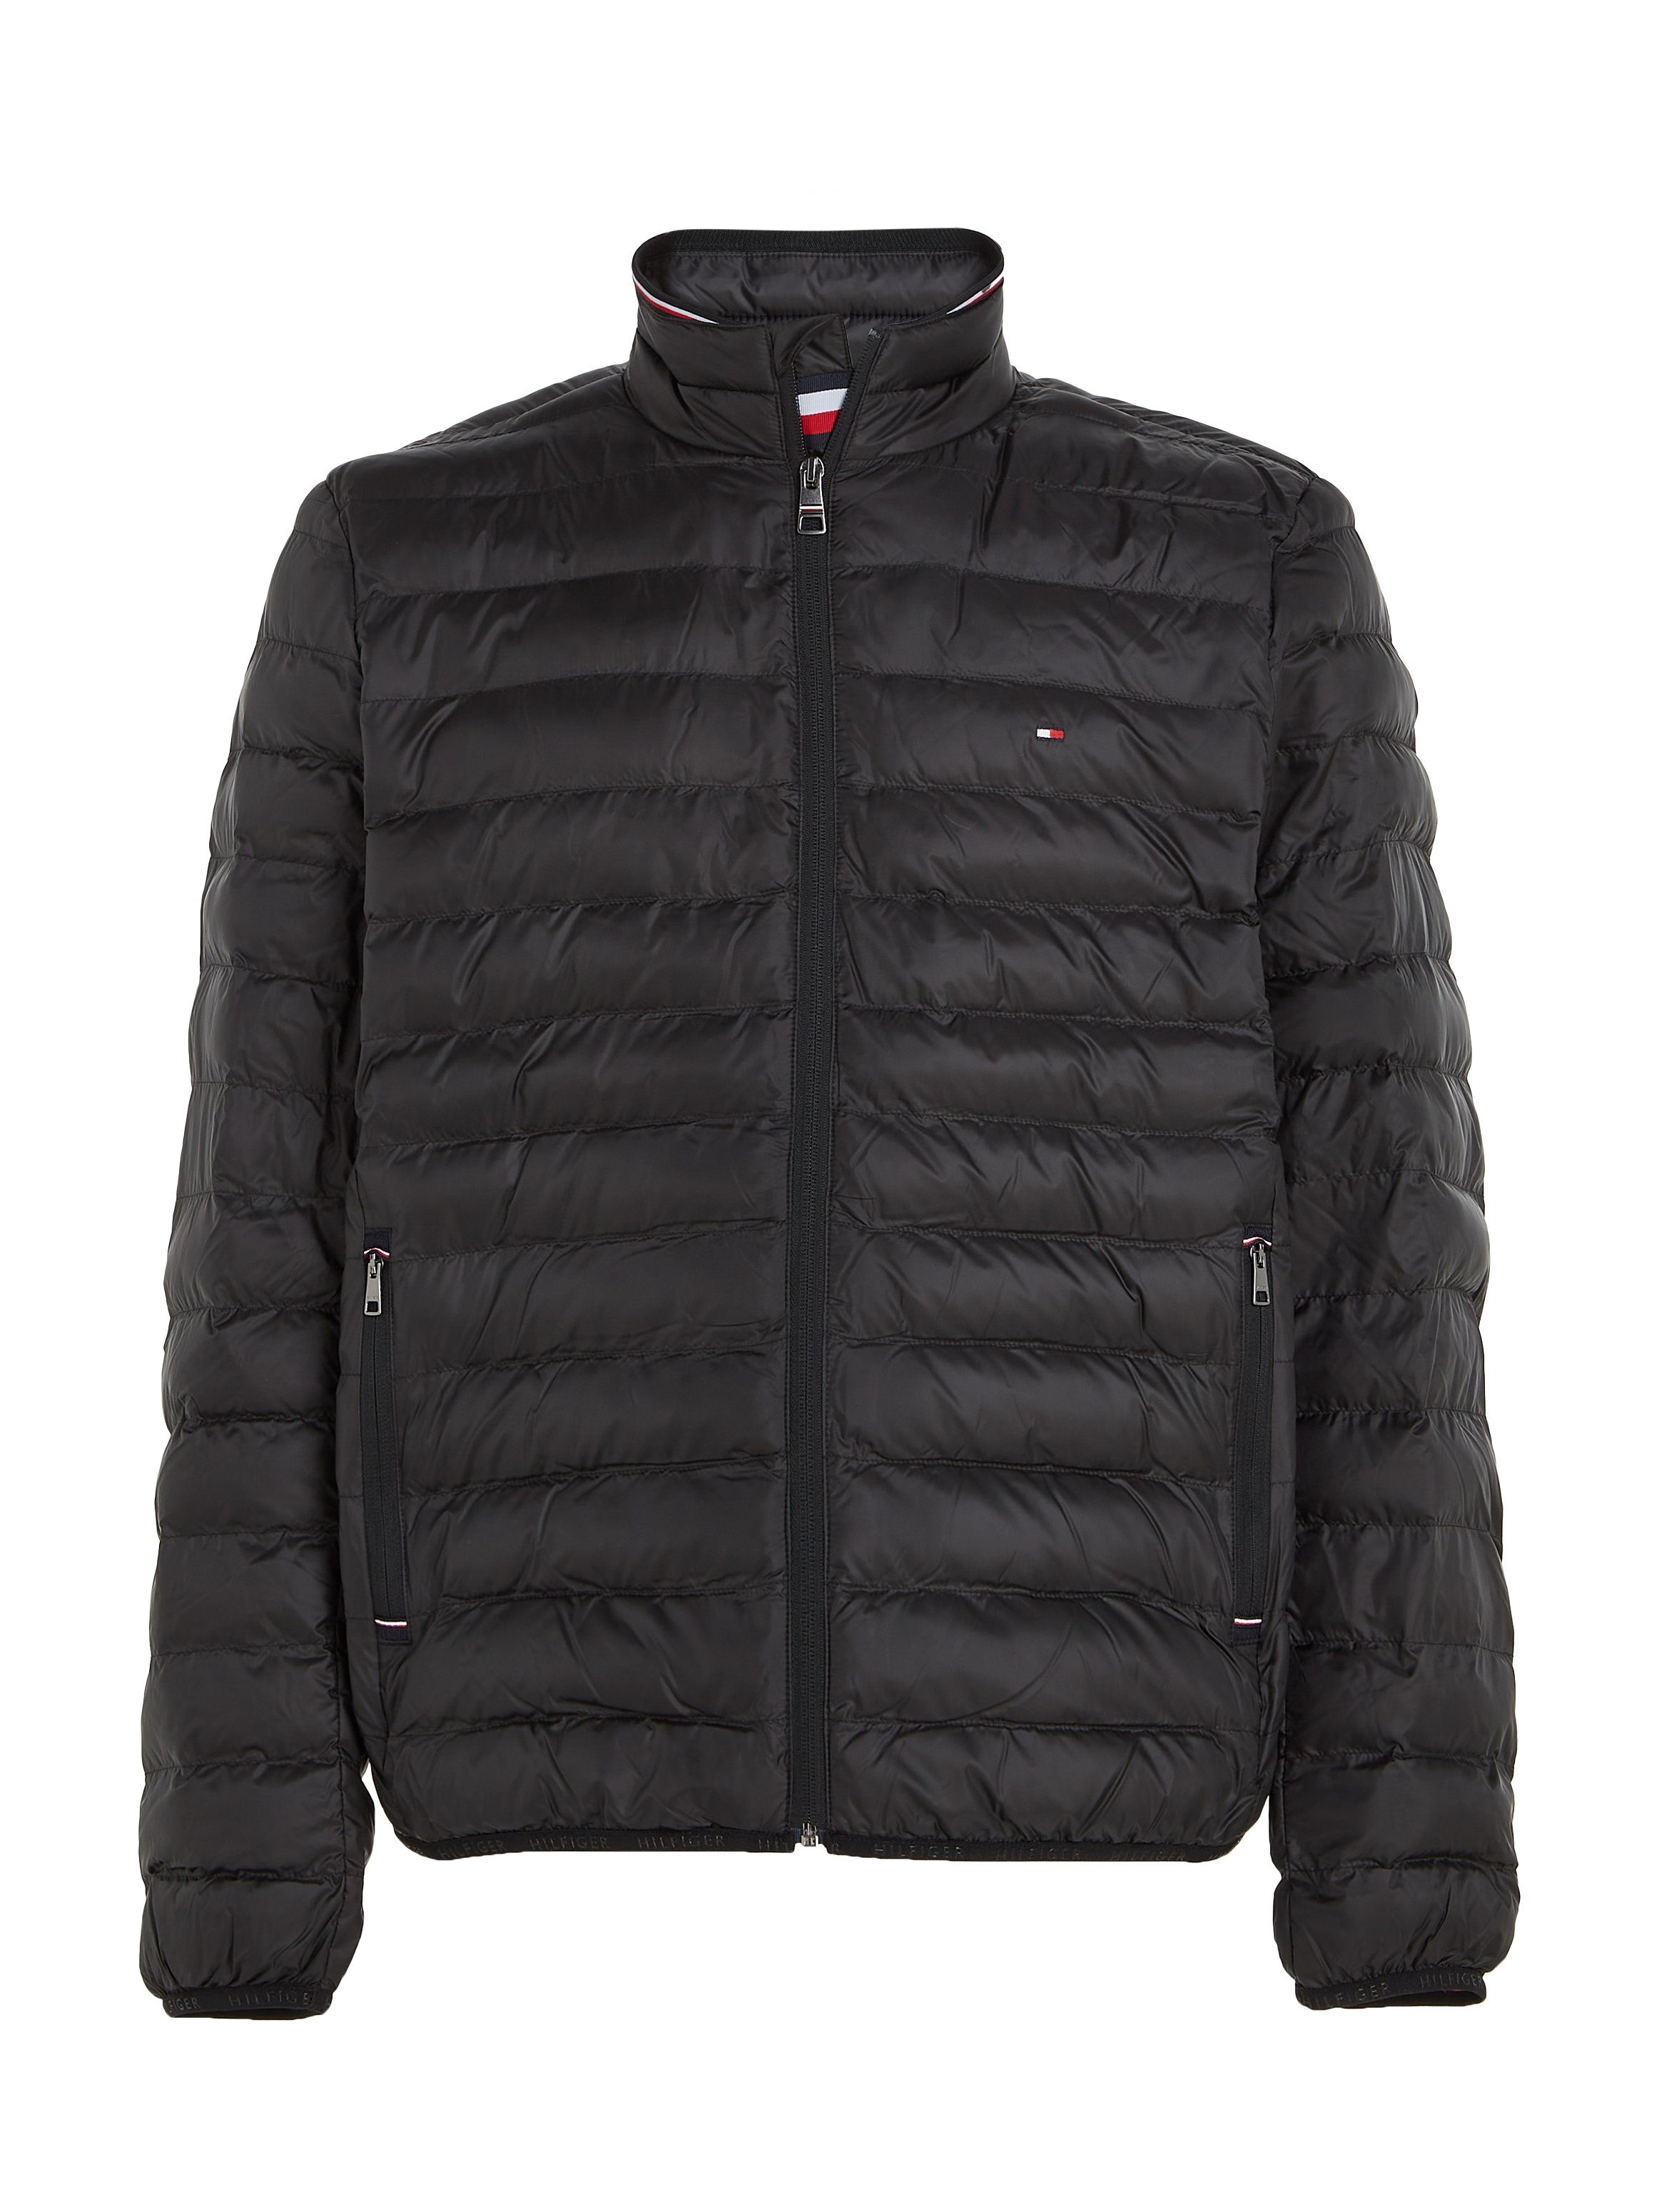 Tommy CORE JACKET PACKABLE Hilfiger black RECYCLED Steppjacke